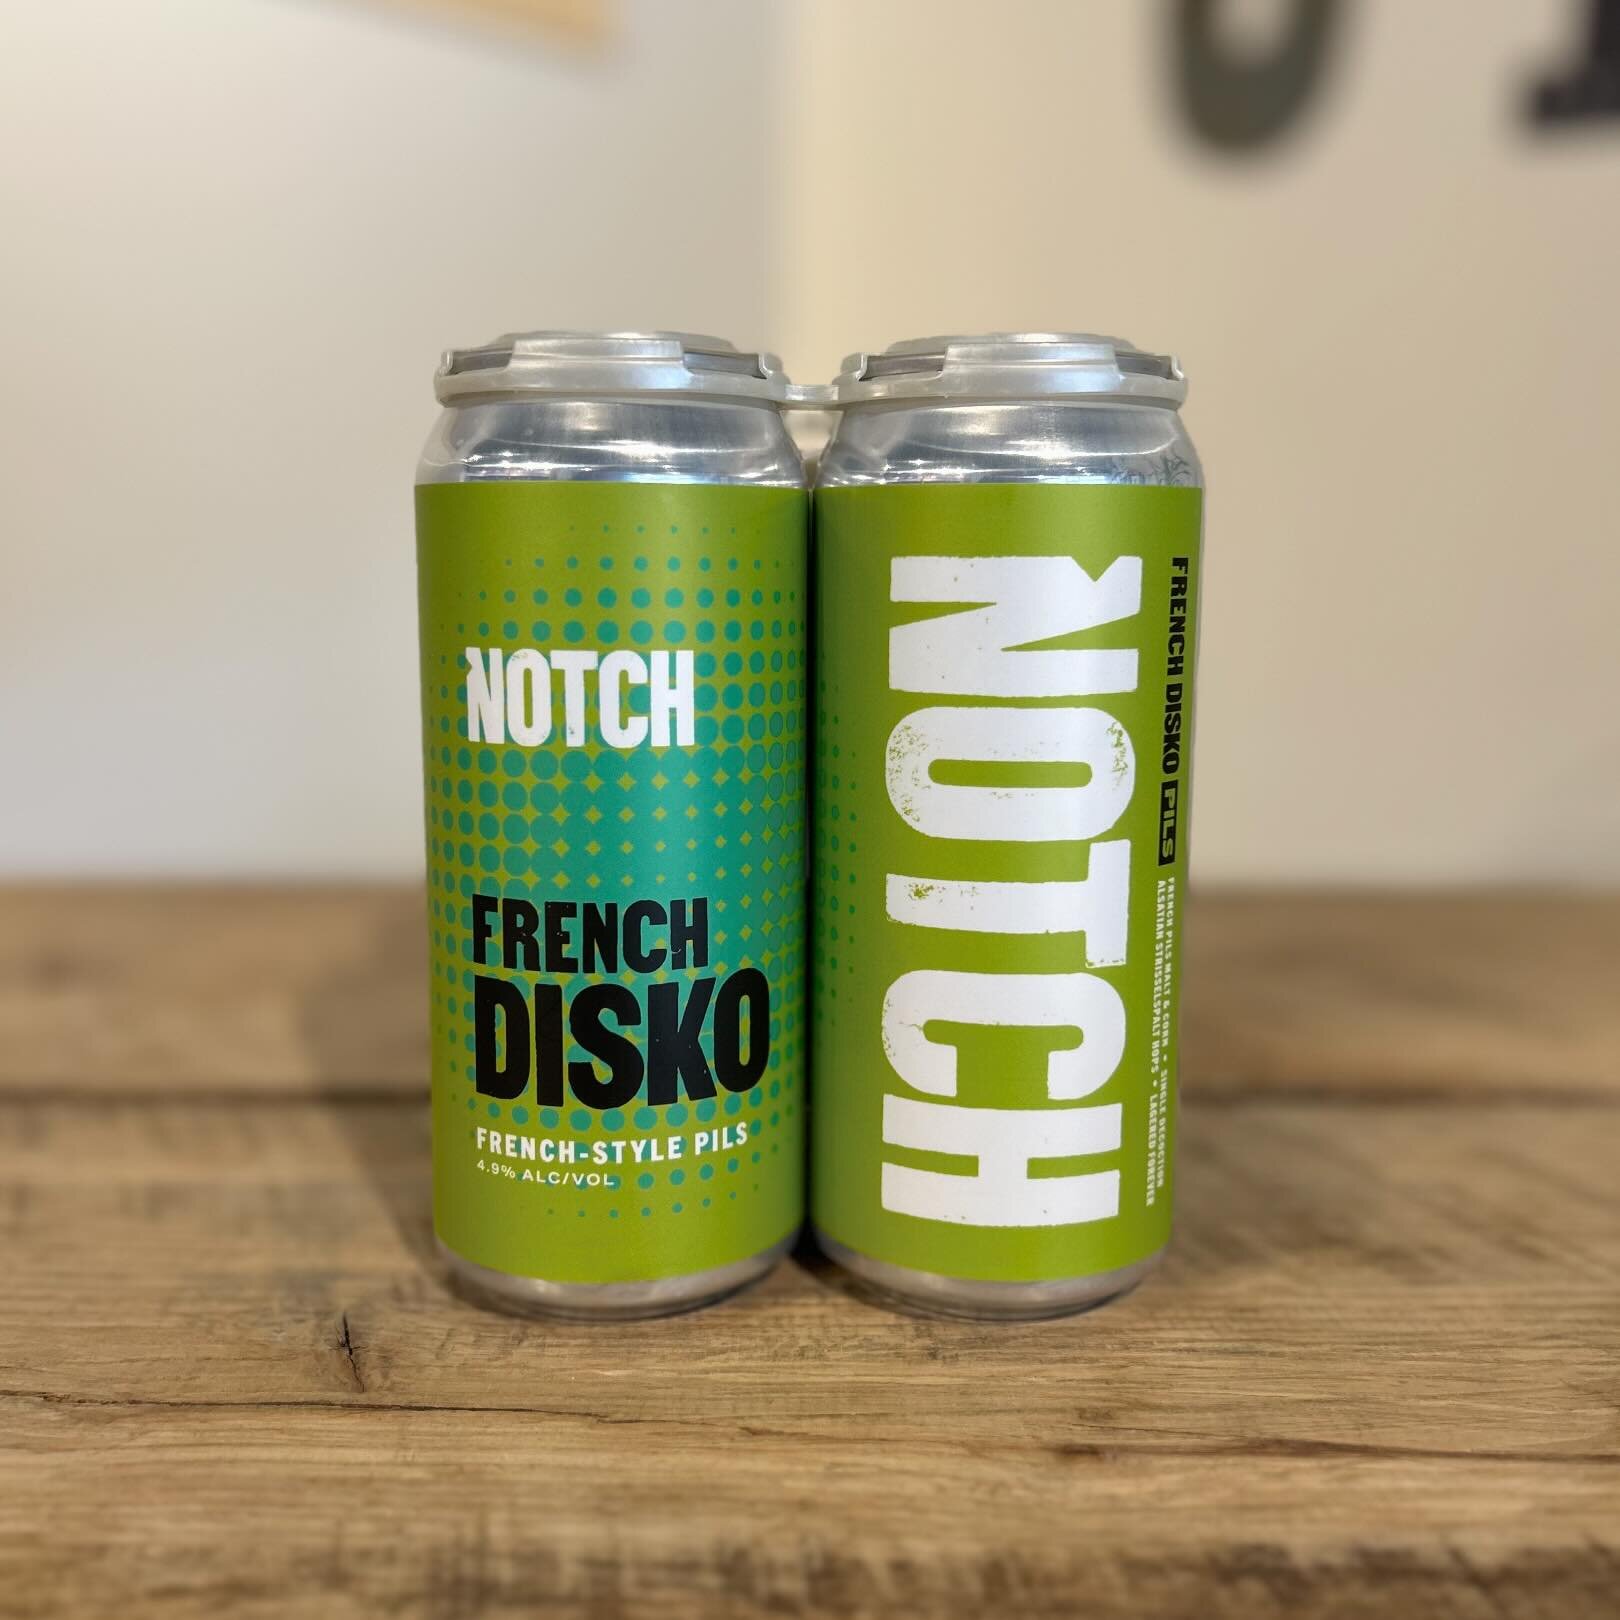 @notchbrewing is back in the shop this week #NowAvailable #SudburyCraftBeer #DrinkLager
&mdash;
FRENCH DISKO

Inspired by the French Pils of the Alsace region in France, French Disko uses French pils malt, corn and Strisselspalt hops, a single decoct